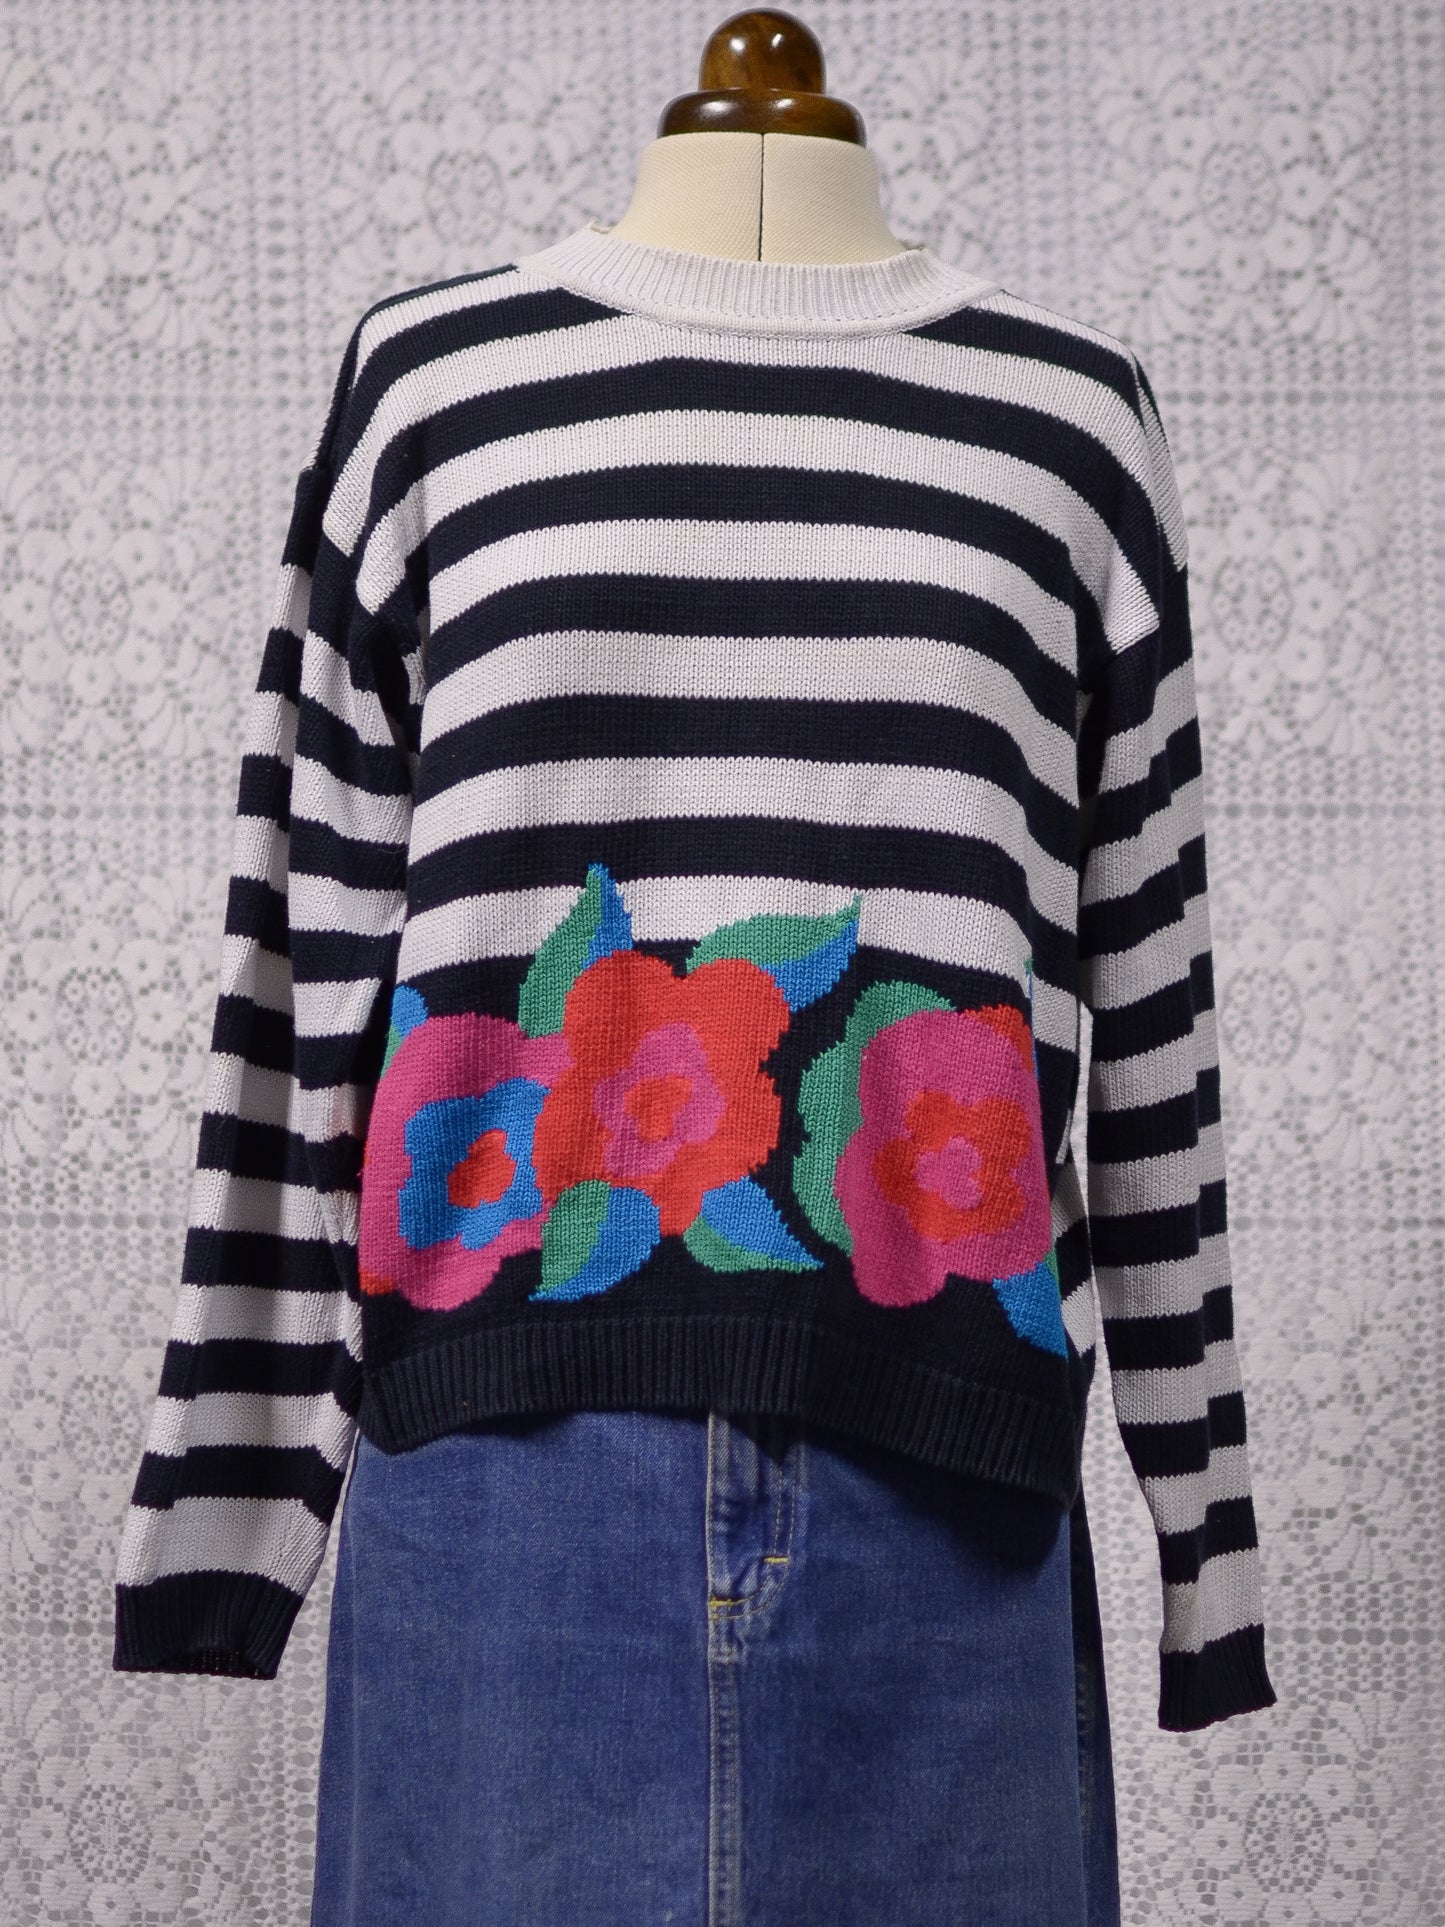 1990s St Michael black and white stripe pink floral cotton jumper